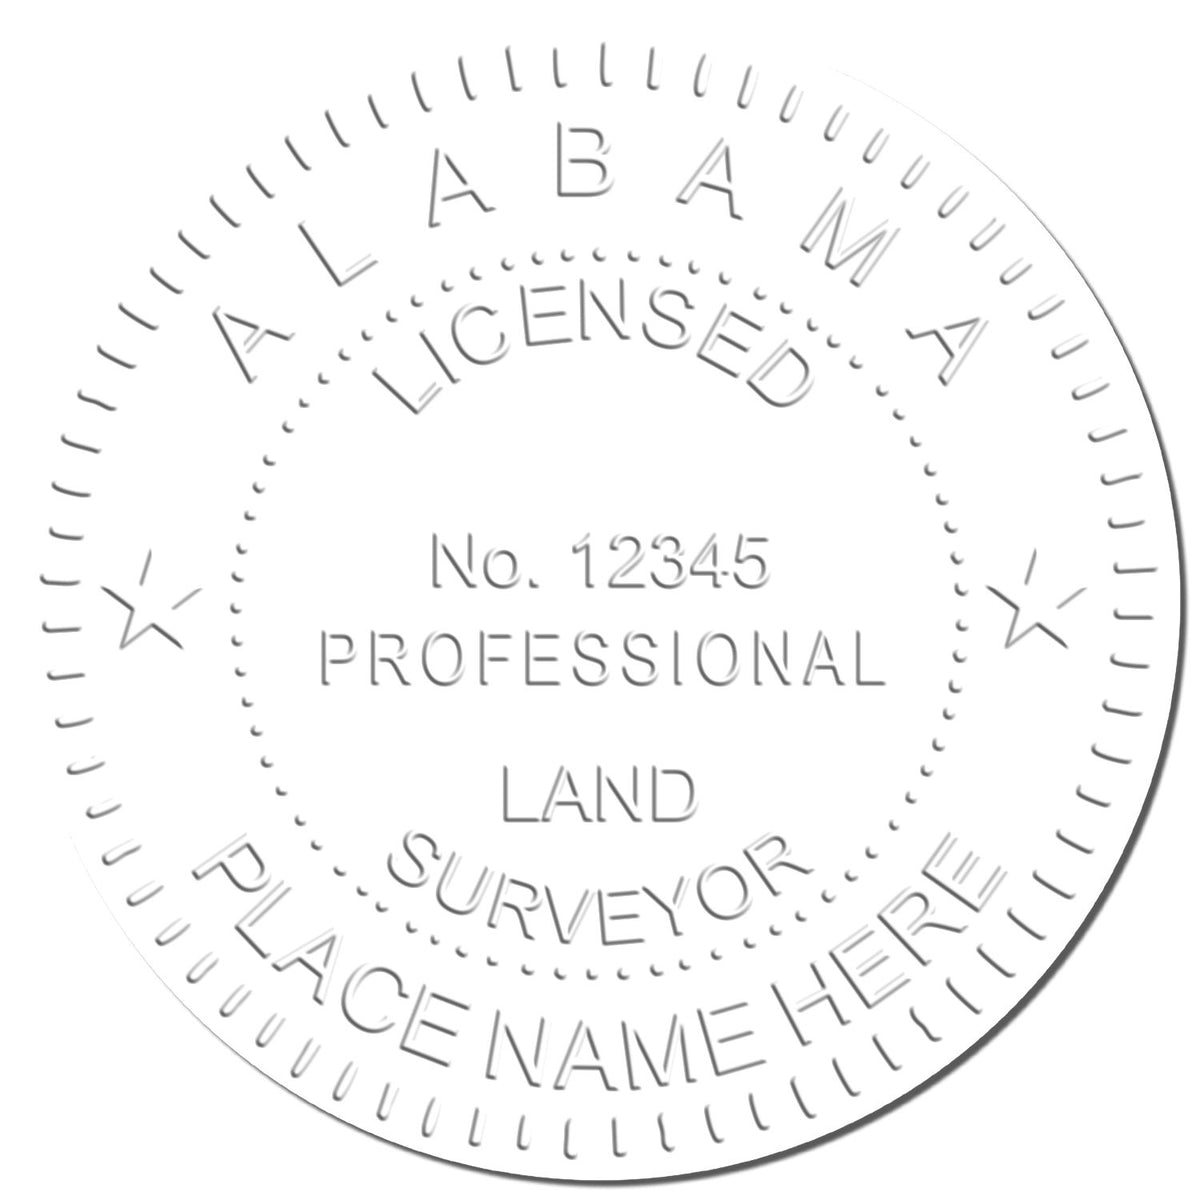 This paper is stamped with a sample imprint of the Long Reach Alabama Land Surveyor Seal, signifying its quality and reliability.